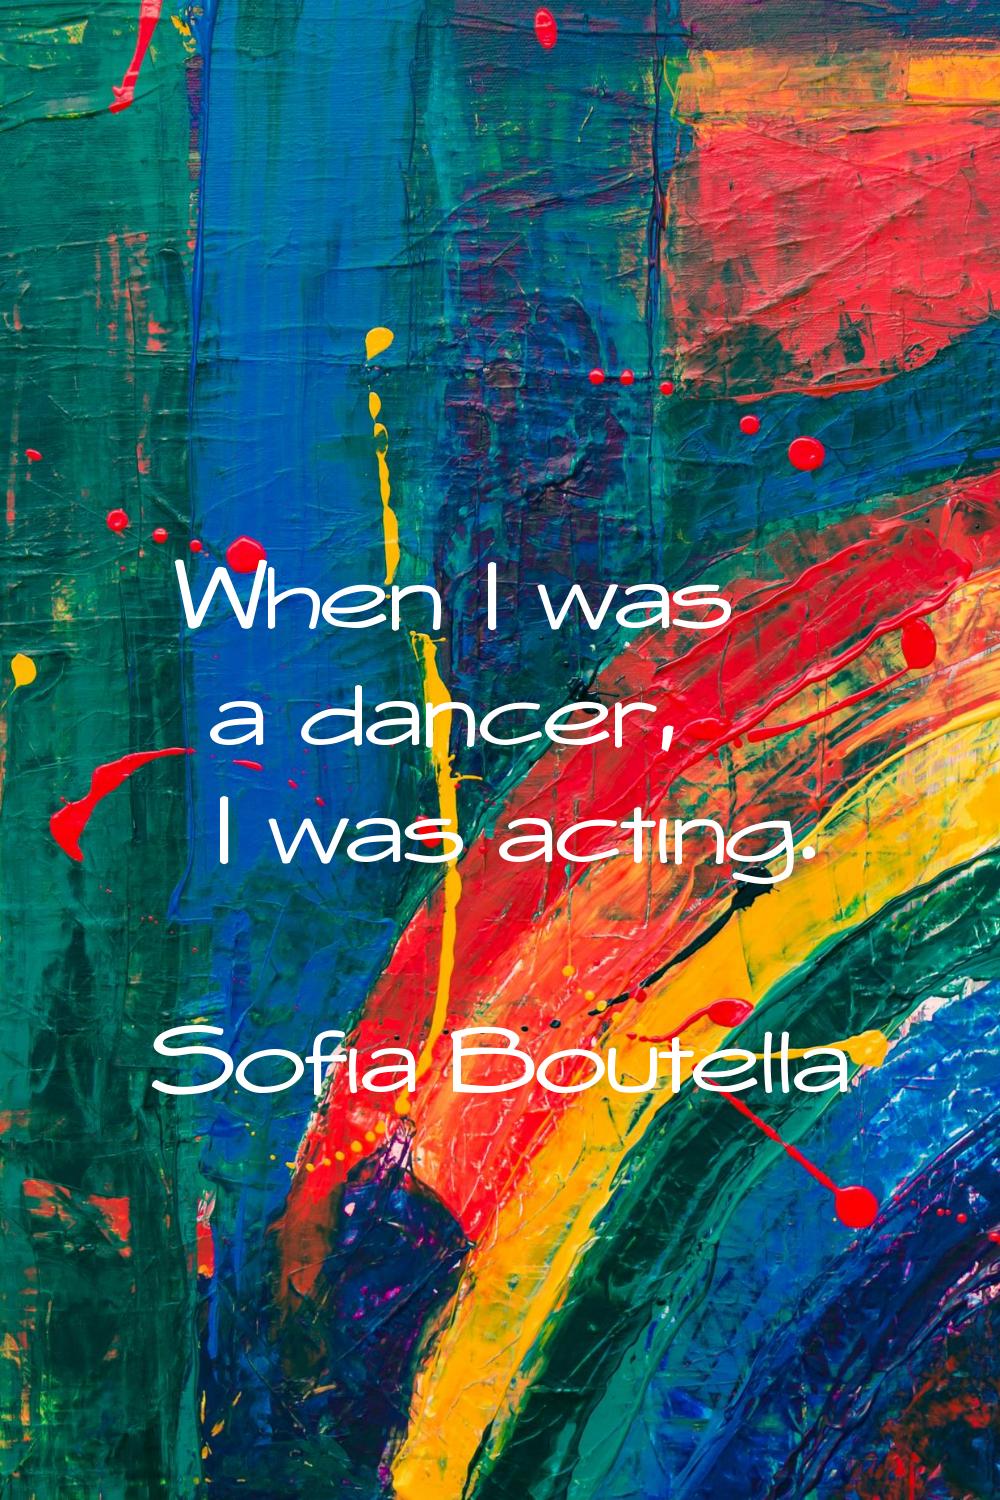 When I was a dancer, I was acting.